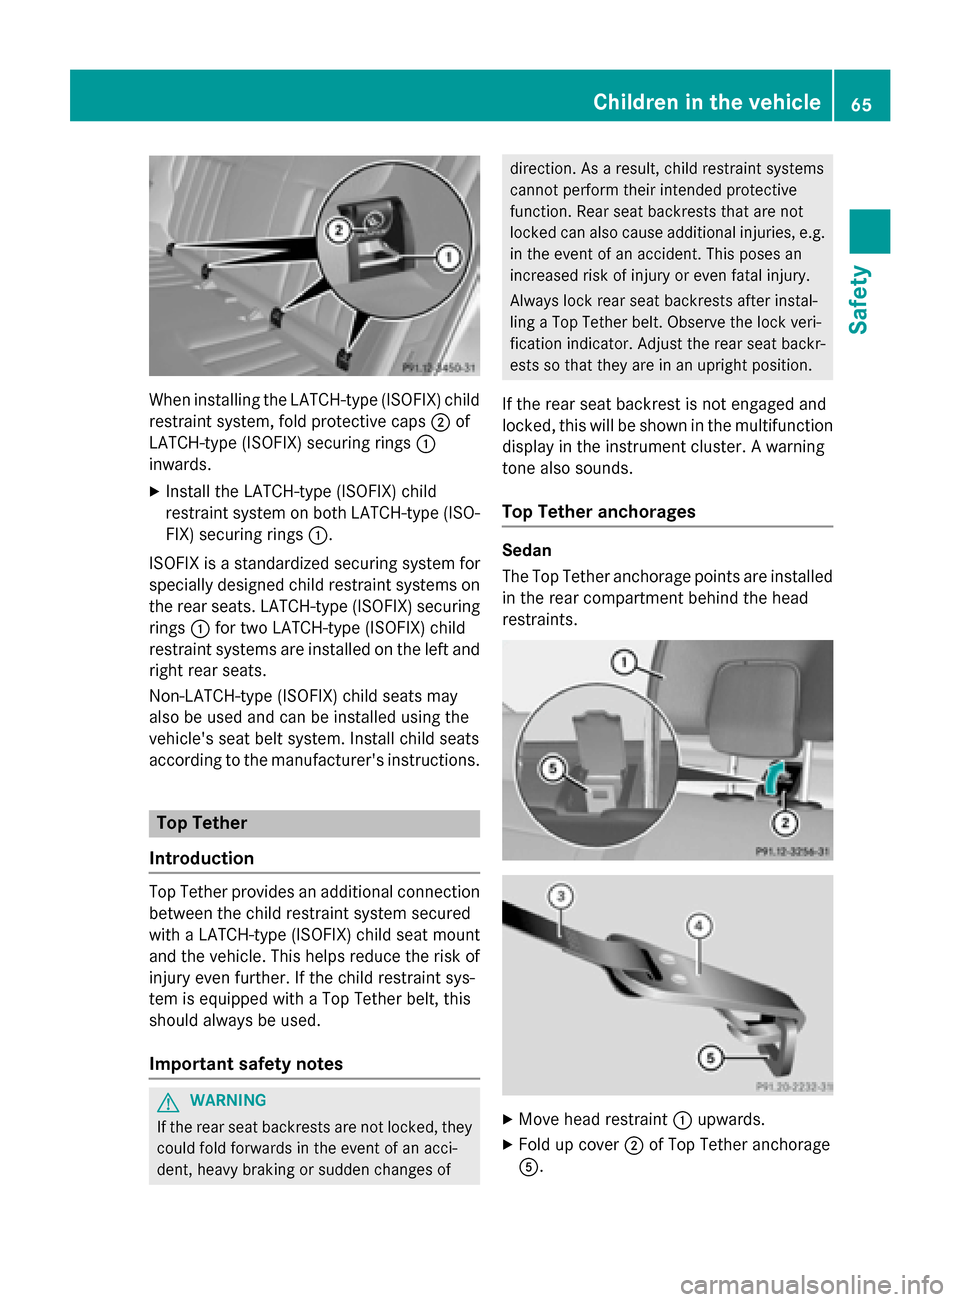 MERCEDES-BENZ E-Class SEDAN 2015 W212 Owners Manual When installing the LATCH-type (ISOFIX) child
restraint system, fold protective caps 0044of
LATCH-type (ISOFIX) securing rings 0043
inwards.
X Install the LATCH-type (ISOFIX) child
restraint system on